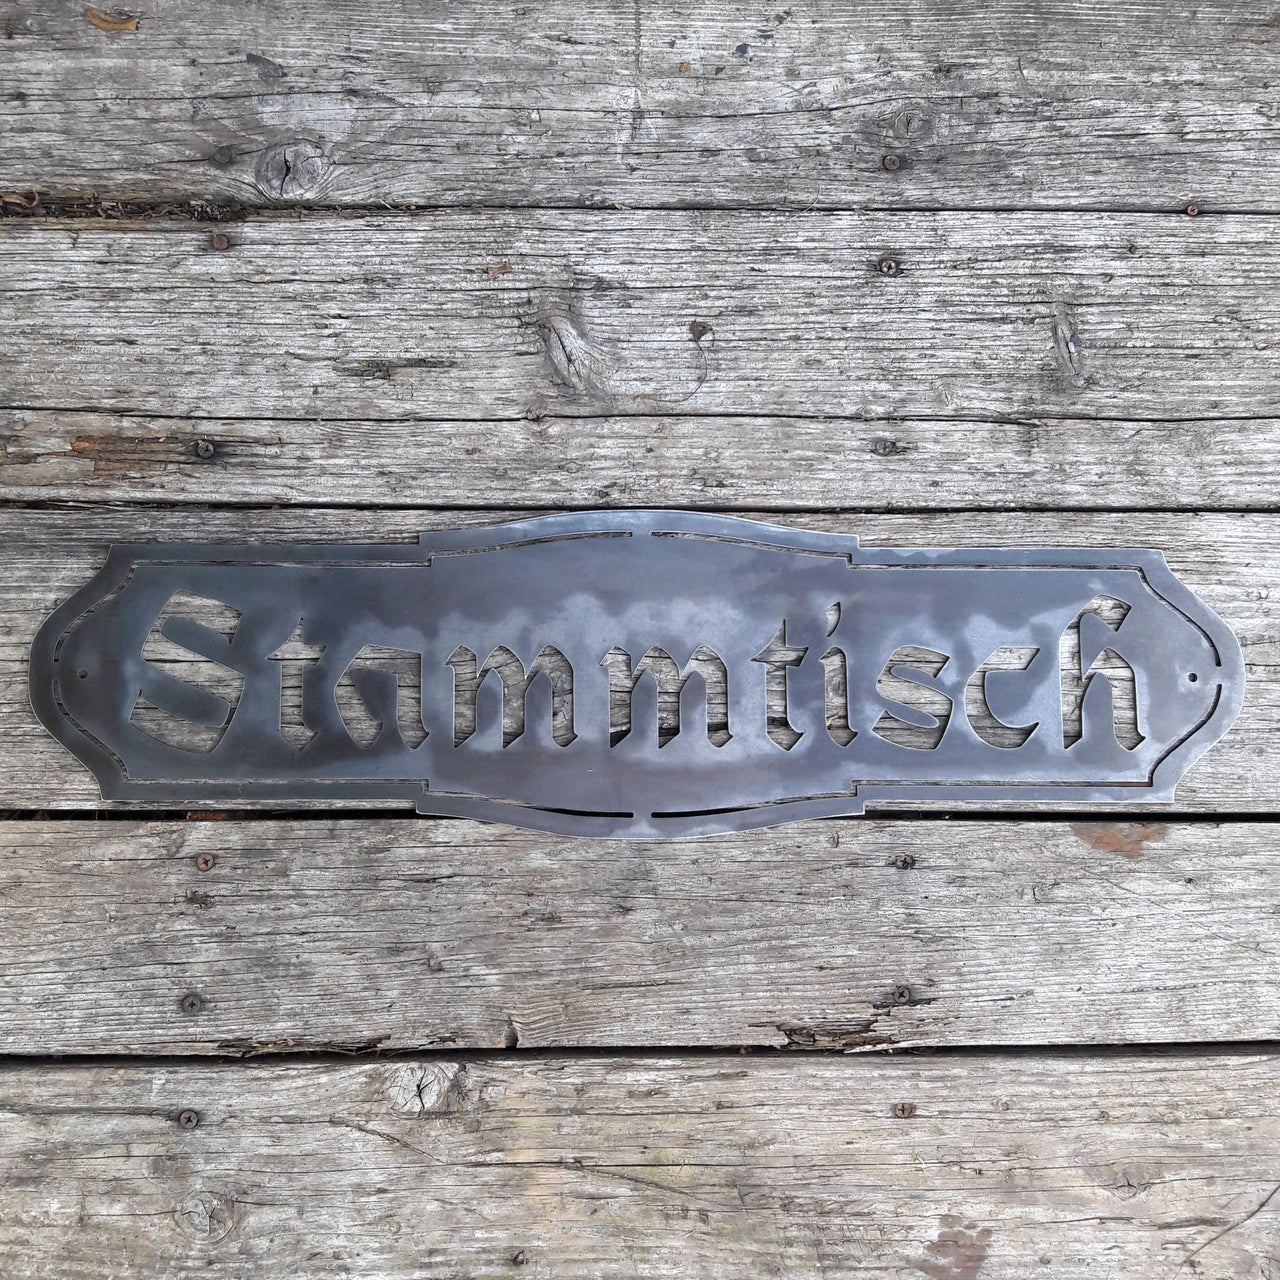 This Metal Sign is written in German and reads, " Stammtisch"